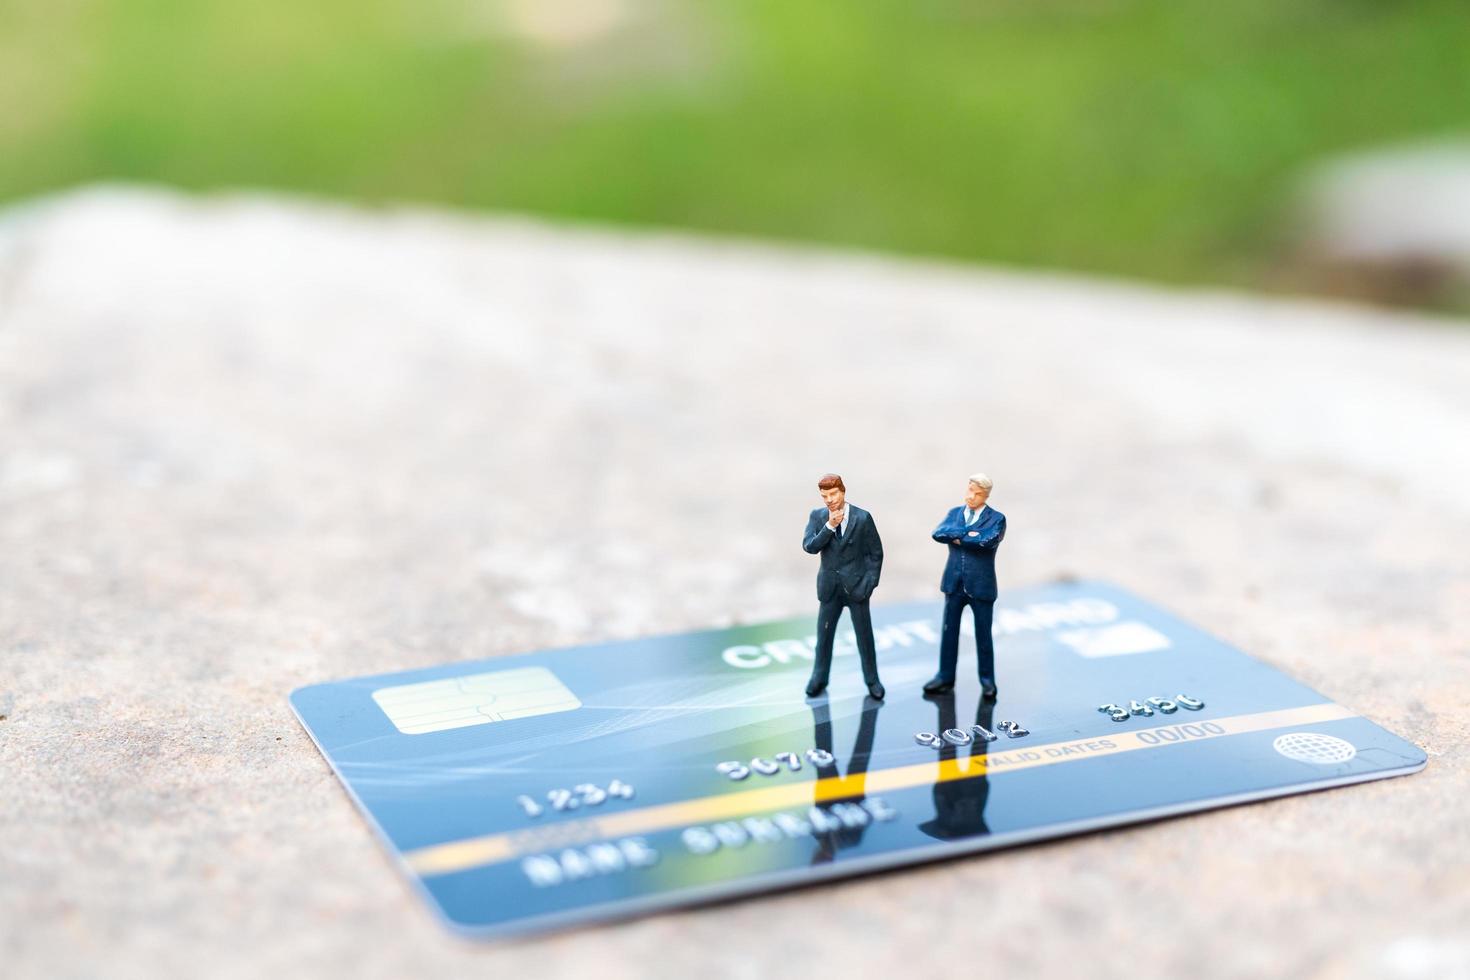 Miniature businesspeople standing on a credit card, business and finance concepts photo